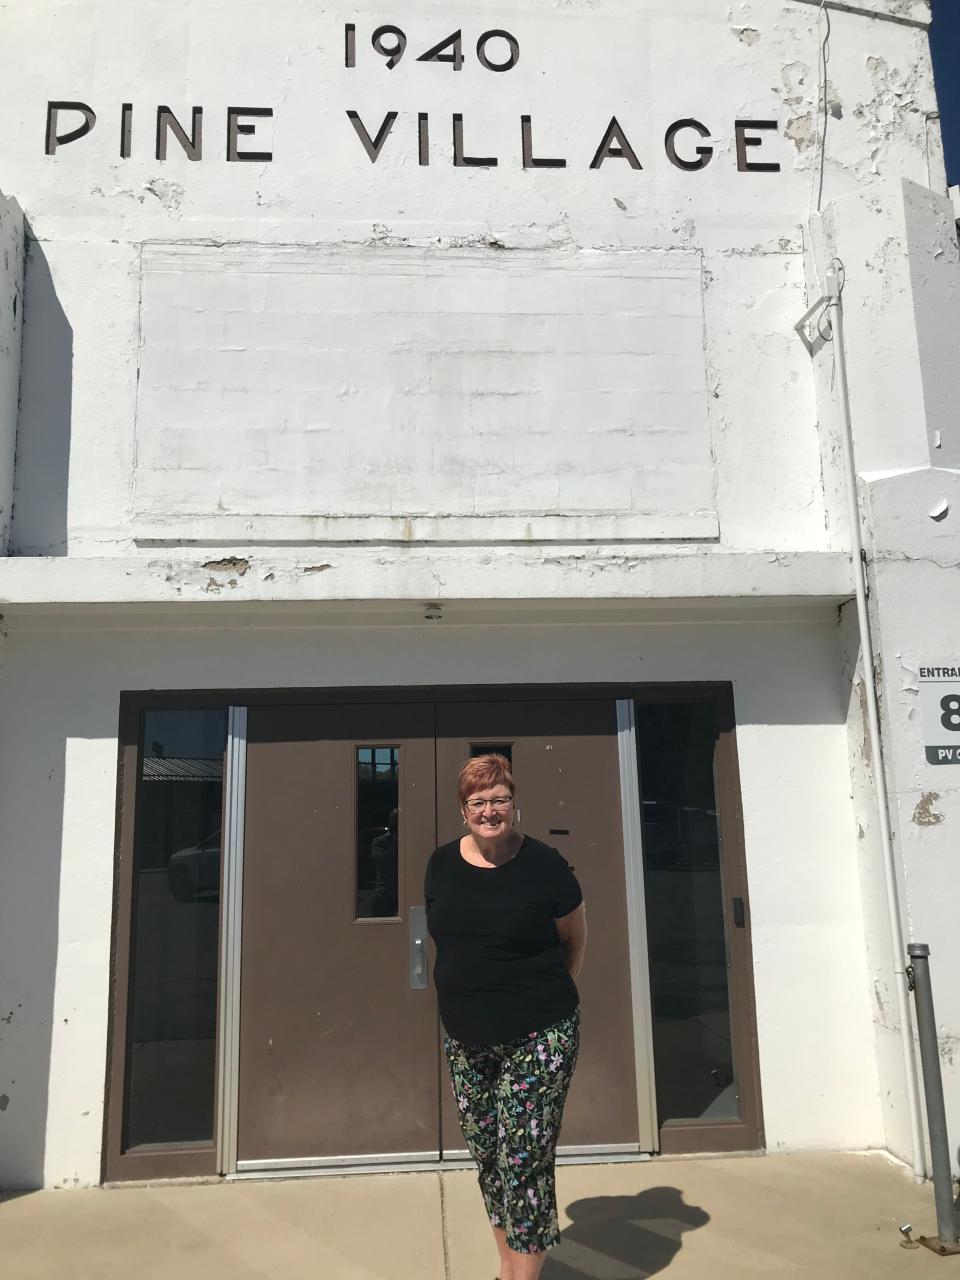 Gail Anderson poses in front of Pine Village gym. She and Alan are married. She's class of 1971, he's 1972. Both went to Purdue. She taught there 1983-98, and was principal 1999-2018.